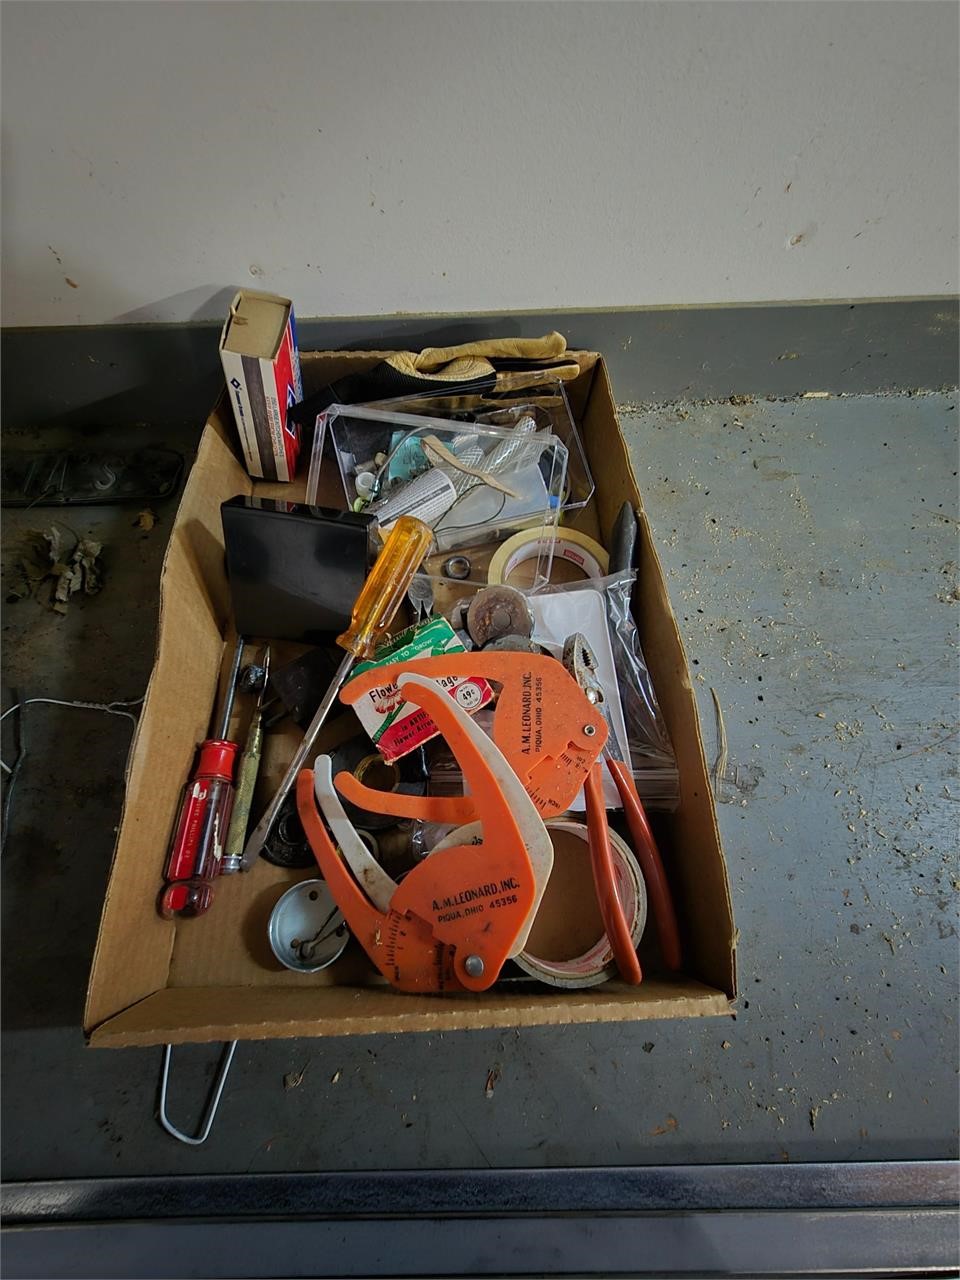 Miscellaneous tools and junk drawer items